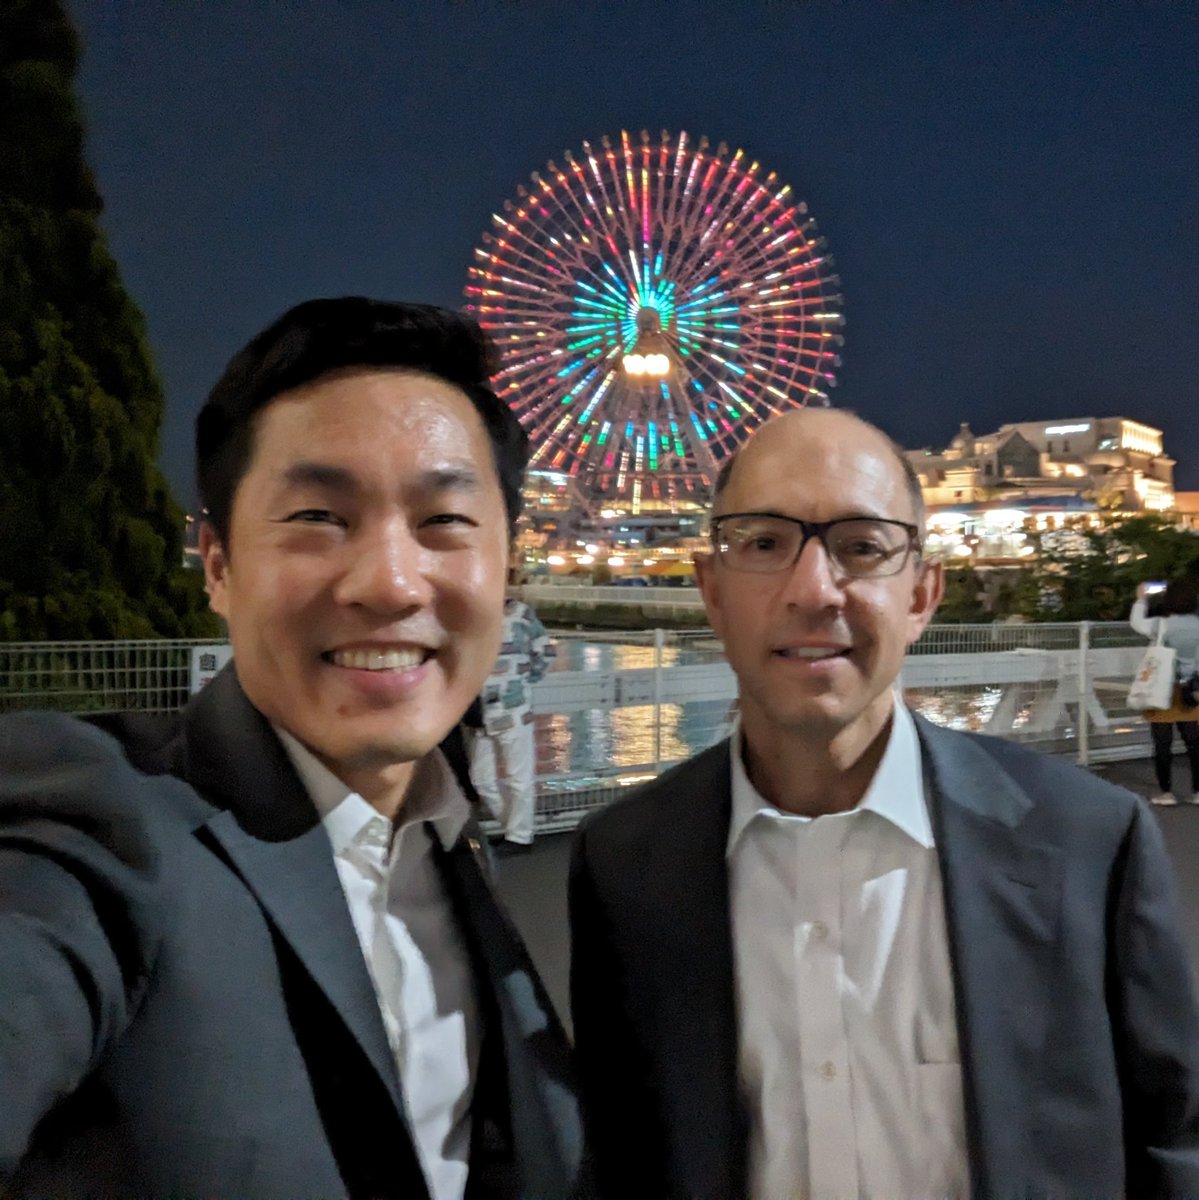 The best part of experiencing #JUA2024 is sharing it with colleagues and friends. Happy to be in Yokohama with @SBoorjian and share a bit of Rochester, Minnesota, with the world. Is Cosmo Clock 21 the Corn Tower of Yokohama? #IYKYK #twinning